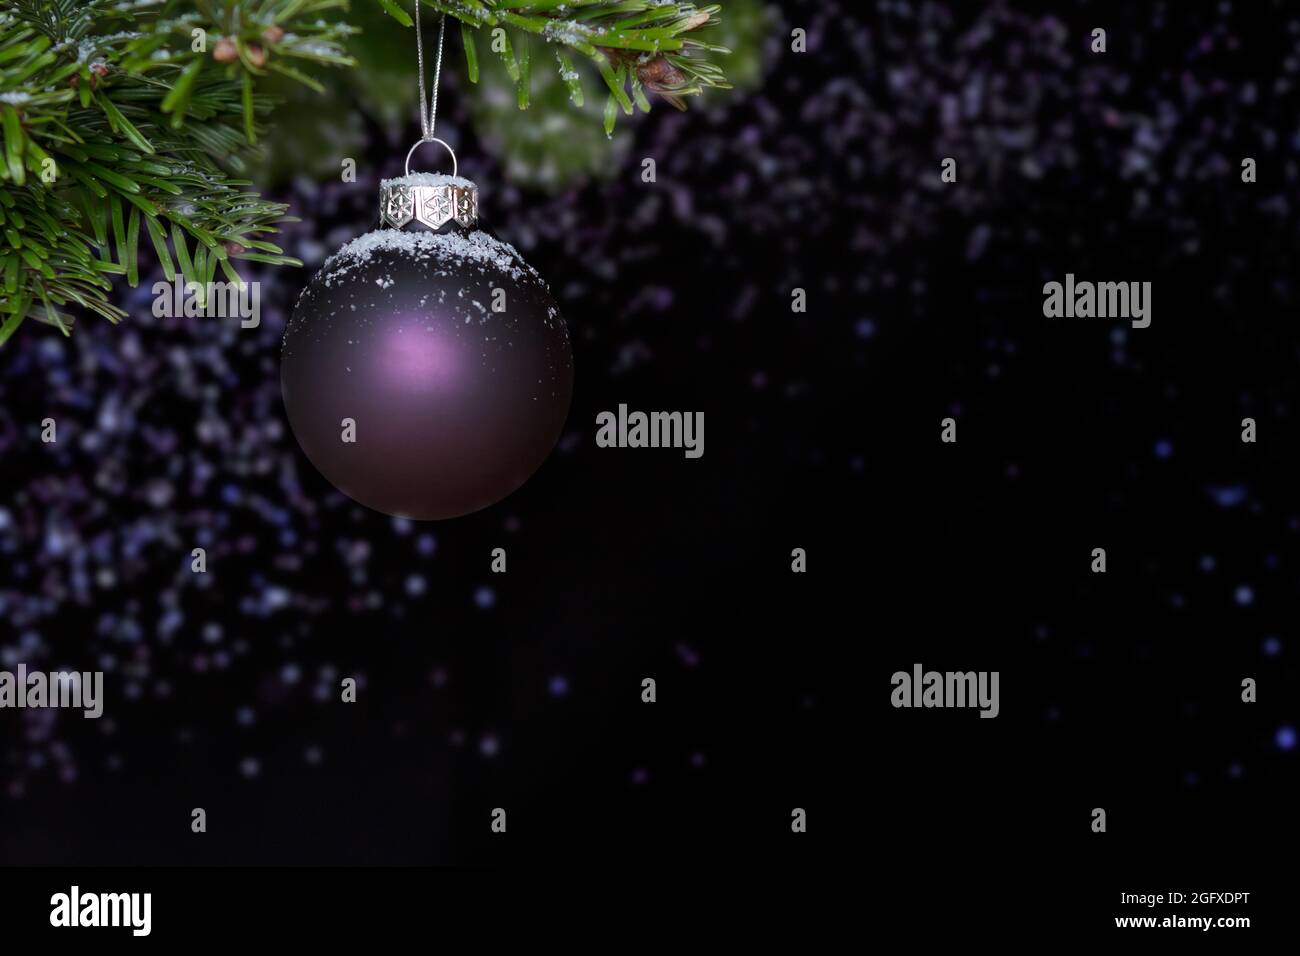 Snowcapped christmas ball hanging on a fir branch, dark background with purple sparkles, copy or text space. Stock Photo